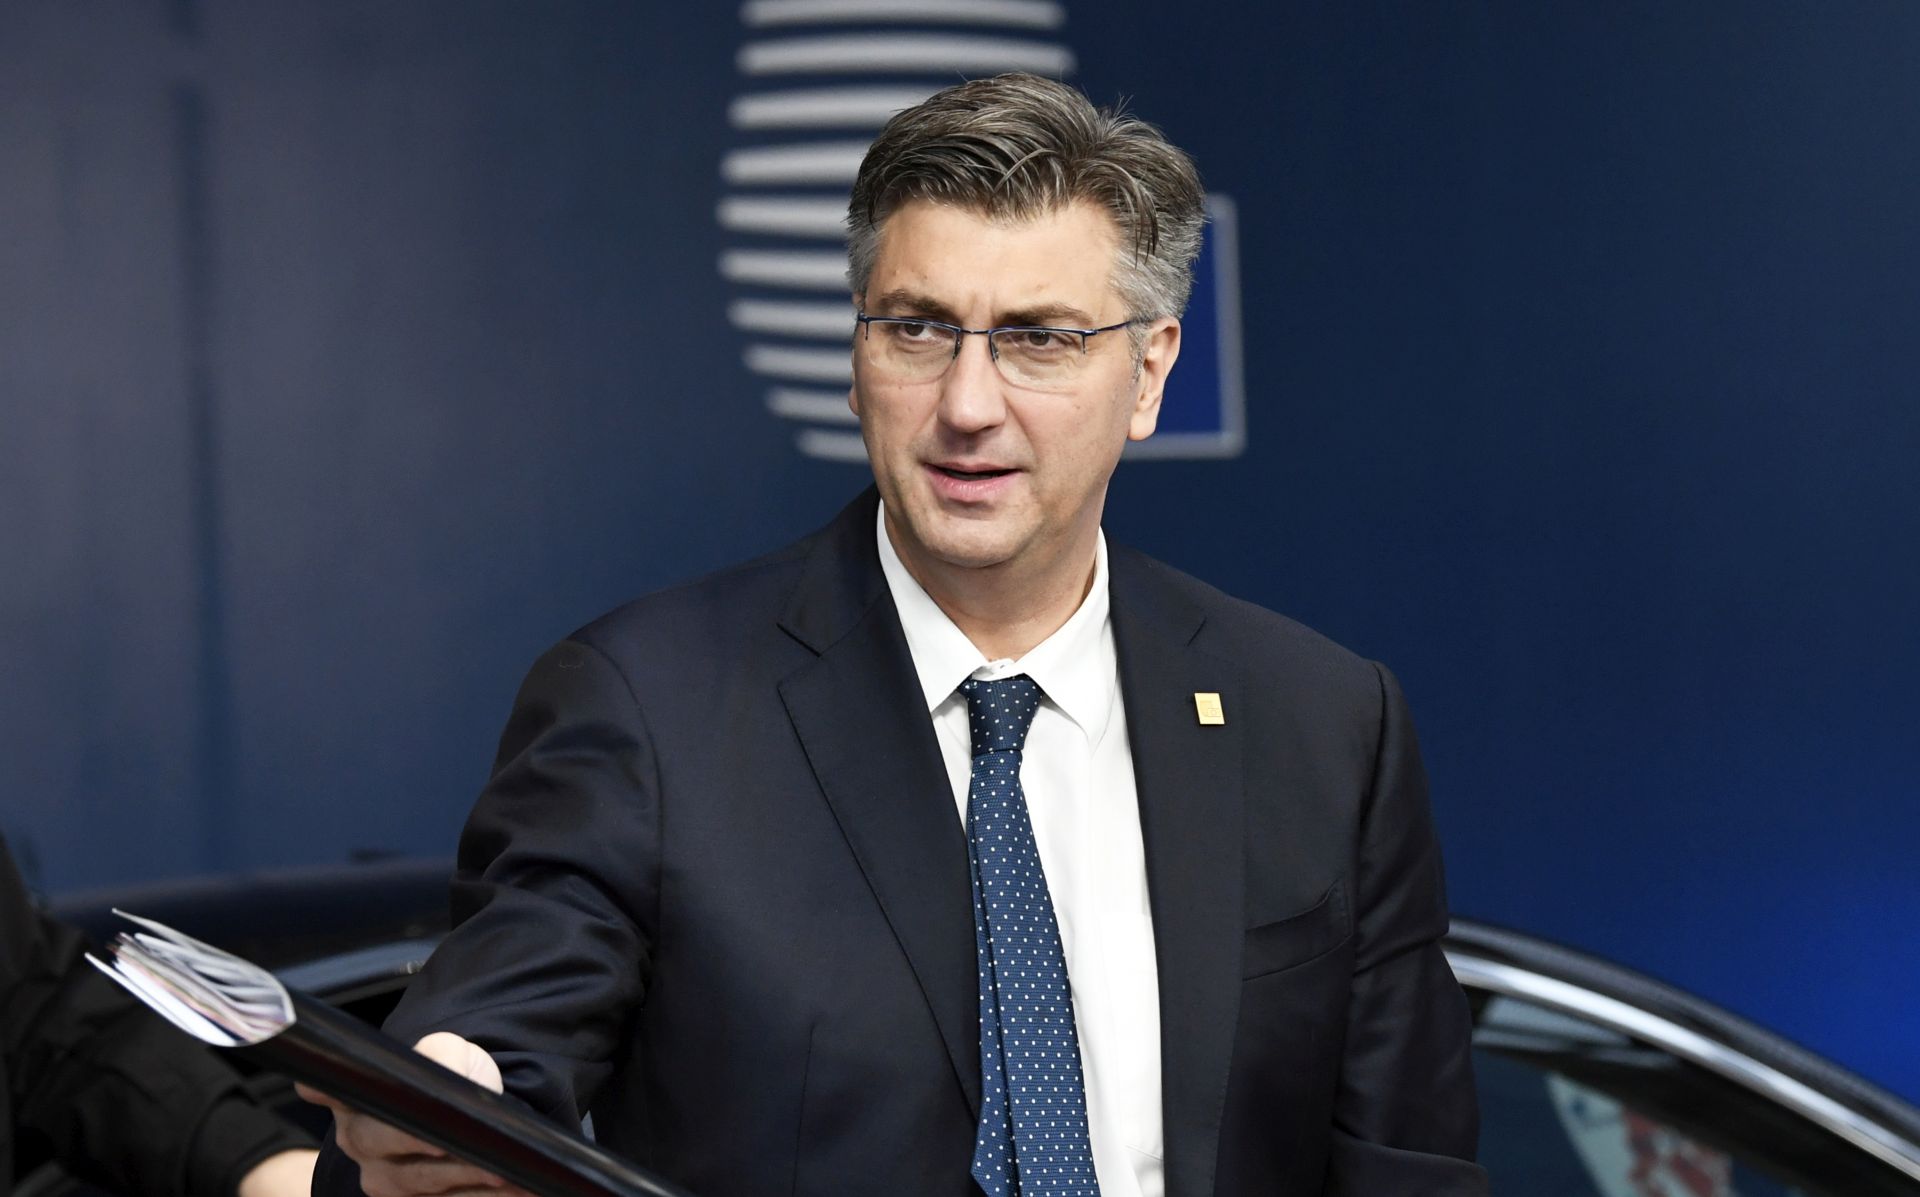 epa07188639 Croatia's Prime Minister Andrej Plenkovic arrives for an extraordinary EU leaders' summit to finalize and formalize the Brexit agreement, in Brussels, Belgium, 25 November 2018. The leaders of the 27 remaining EU member countries (EU27) meet 'to endorse the draft Brexit withdrawal agreement and to approve the draft political declaration on future EU-UK relations' in a special meeting of the European Council on Britain leaving the EU under Article 50.  EPA/PIROSCHKA VAN DE WOUW / POOL